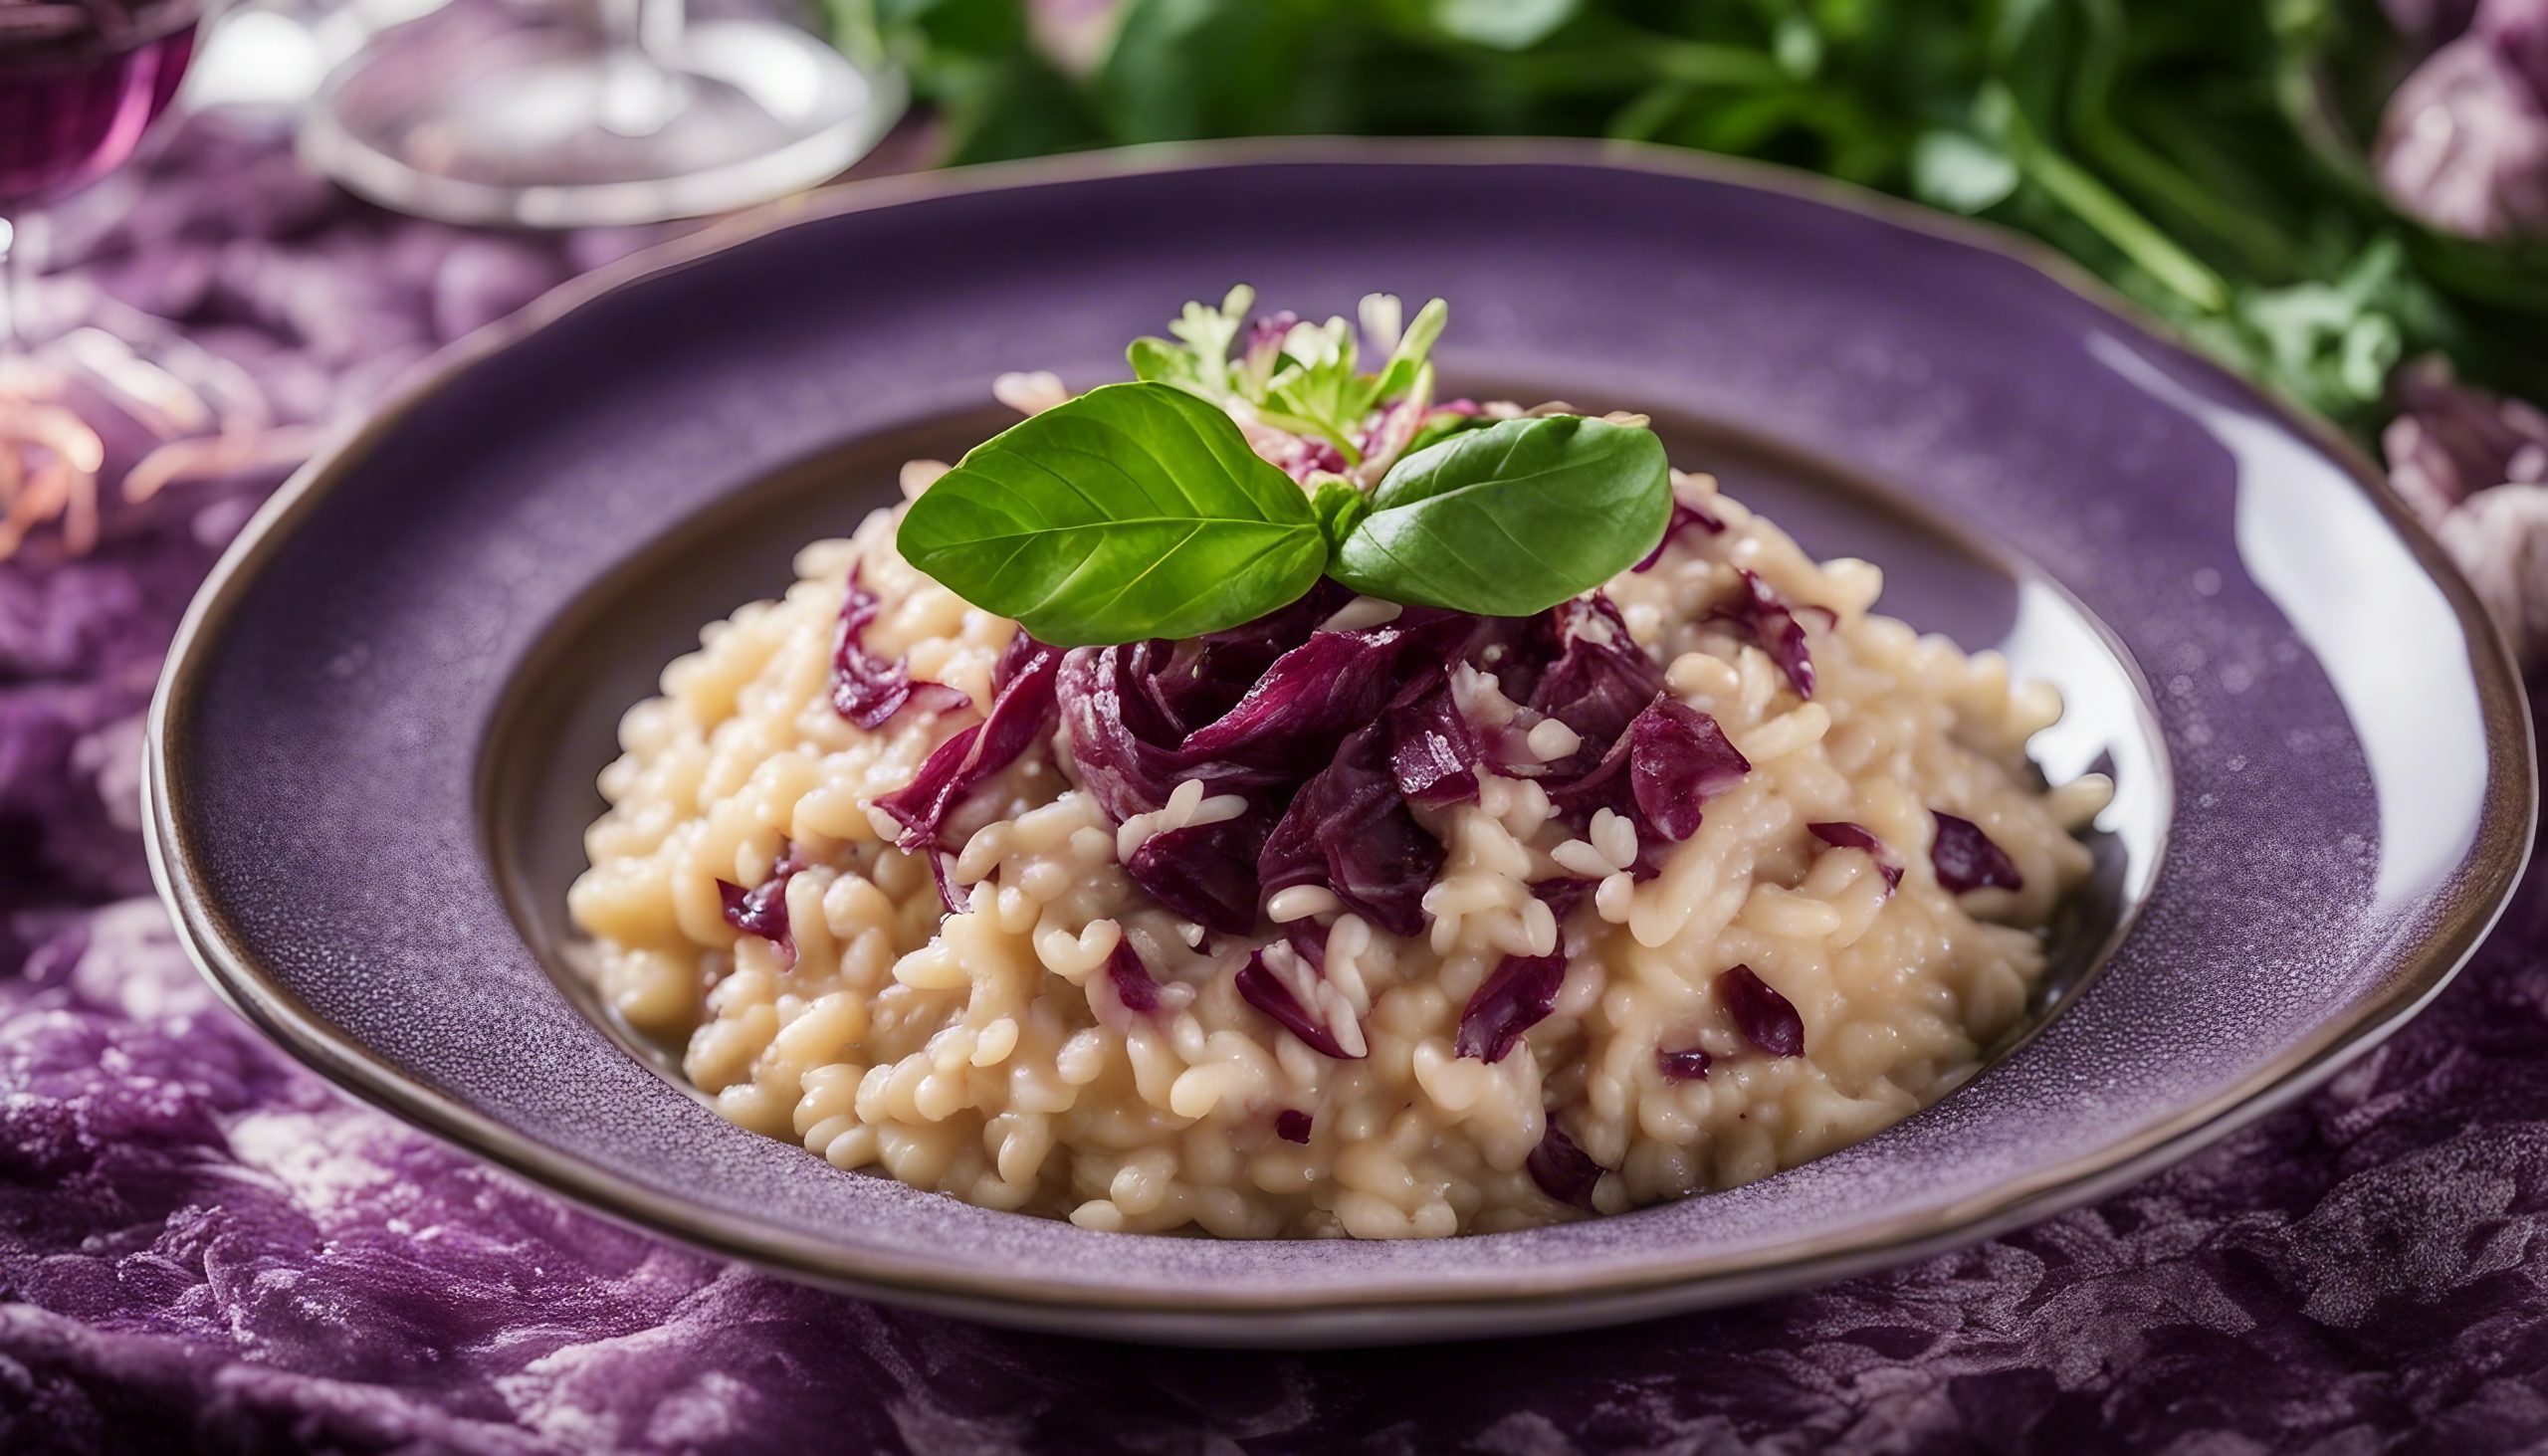 Risotto al Radicchio, creamy risotto cooked with radicchio, offering a stunning contrast of purple